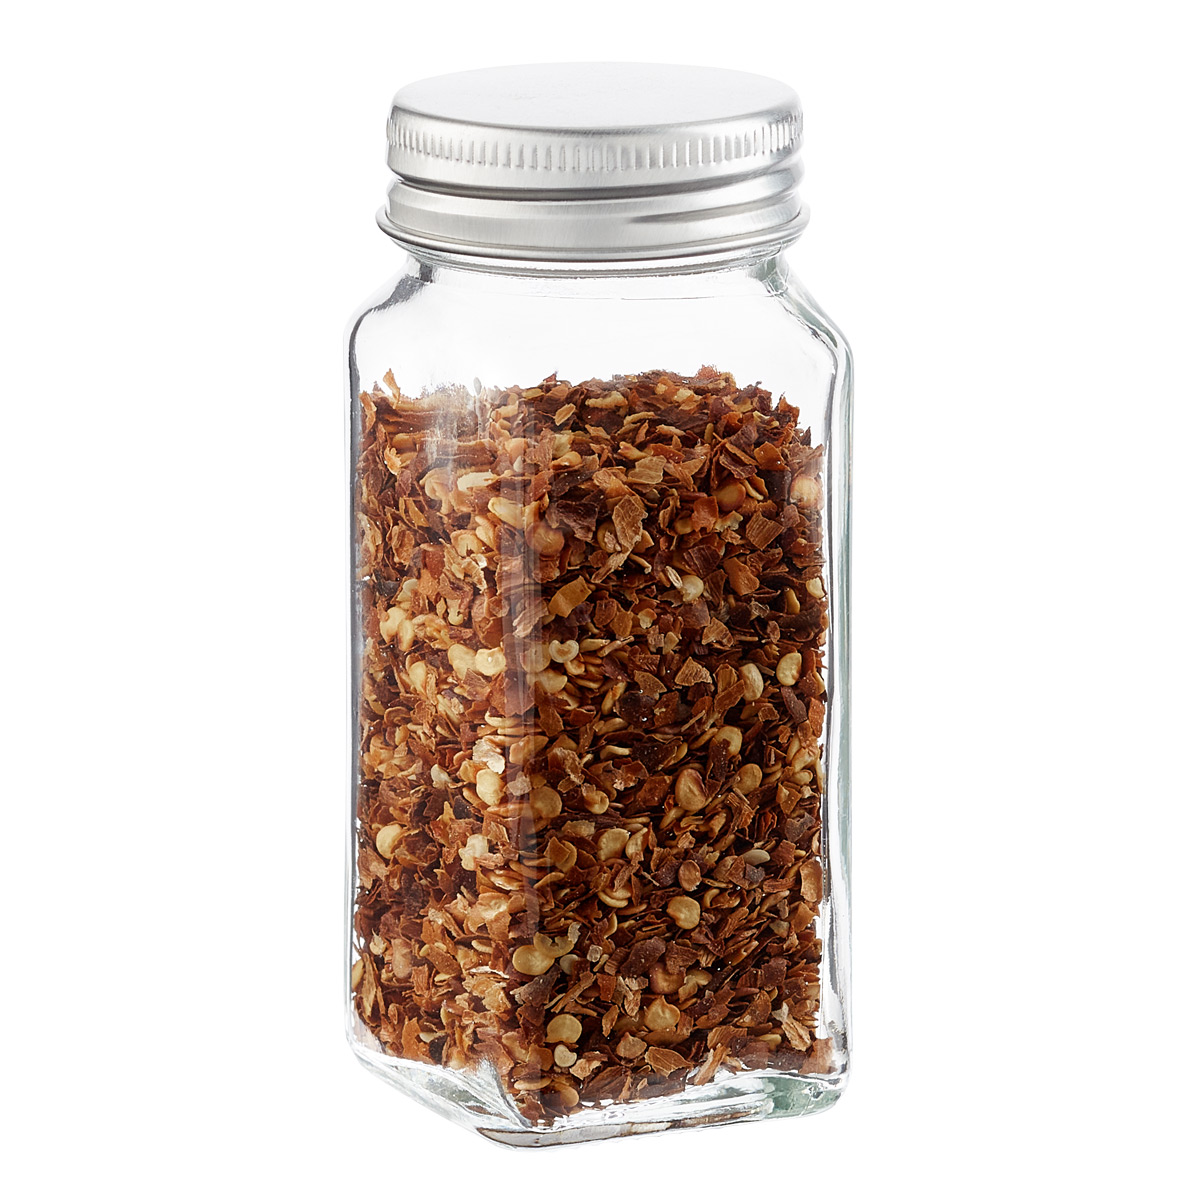 https://www.containerstore.com/catalogimages/433241/10085715_3-Oz_Spice_Jar_with_Aluminu.jpg